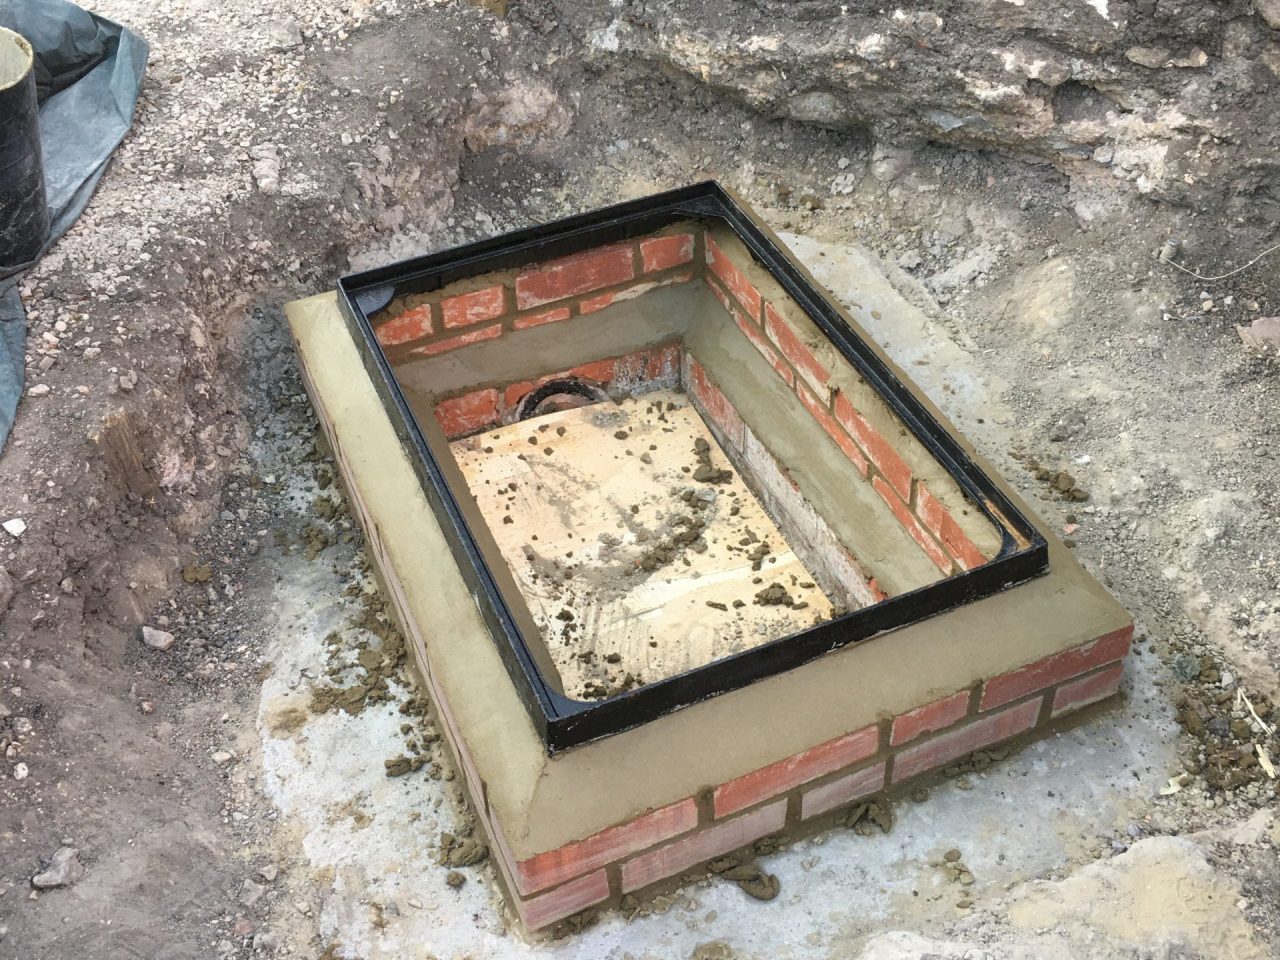 New man hole built to the required height